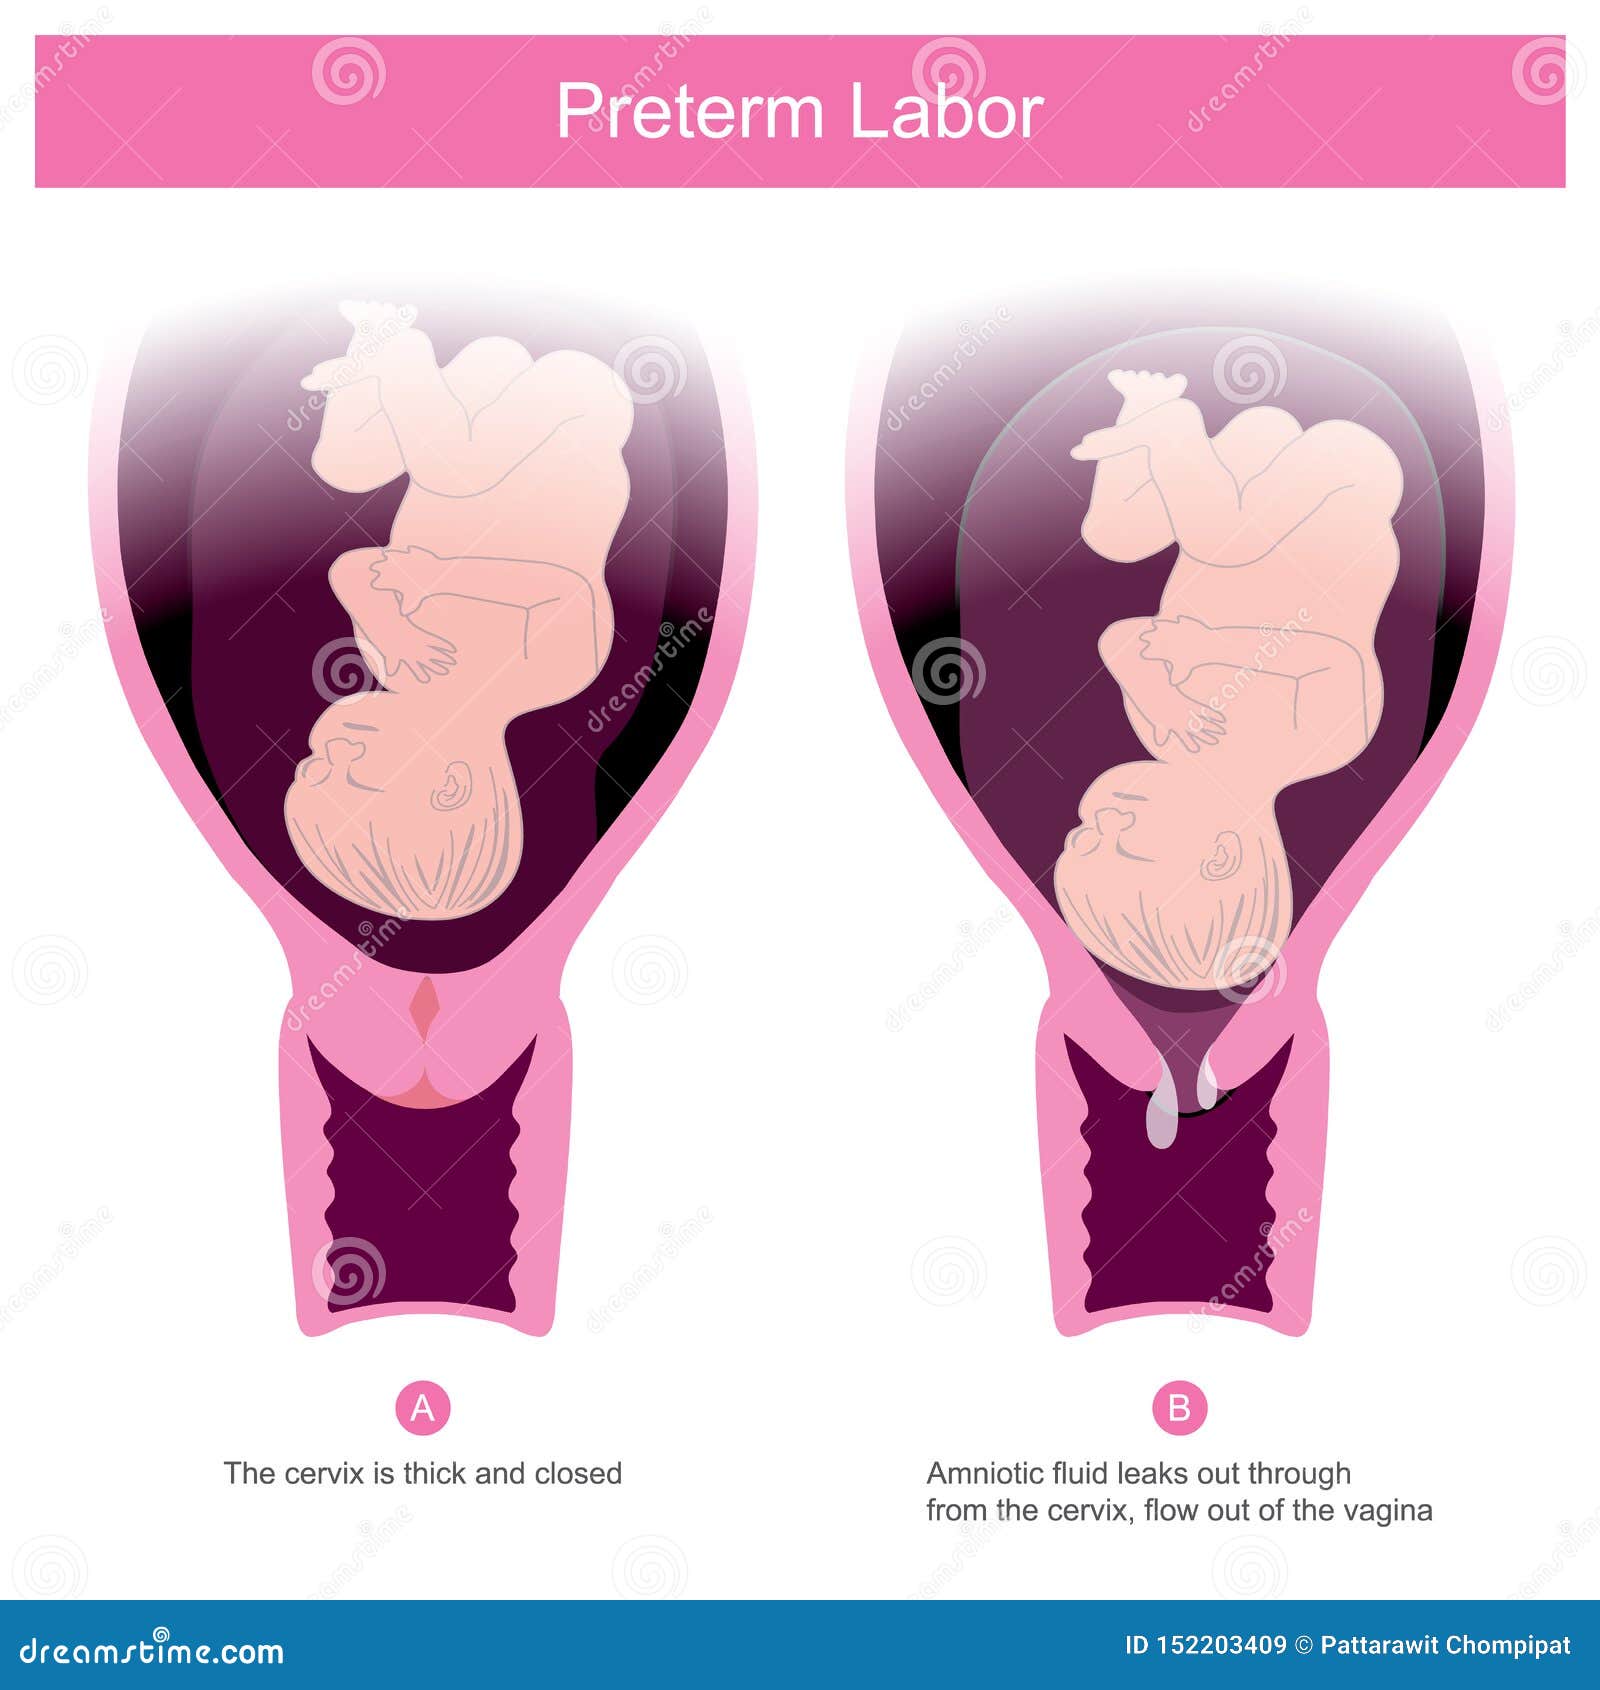 the premature birth, can occur in conditions of amniotic fluid leaks out through the cervix .and flow out of the vagina including